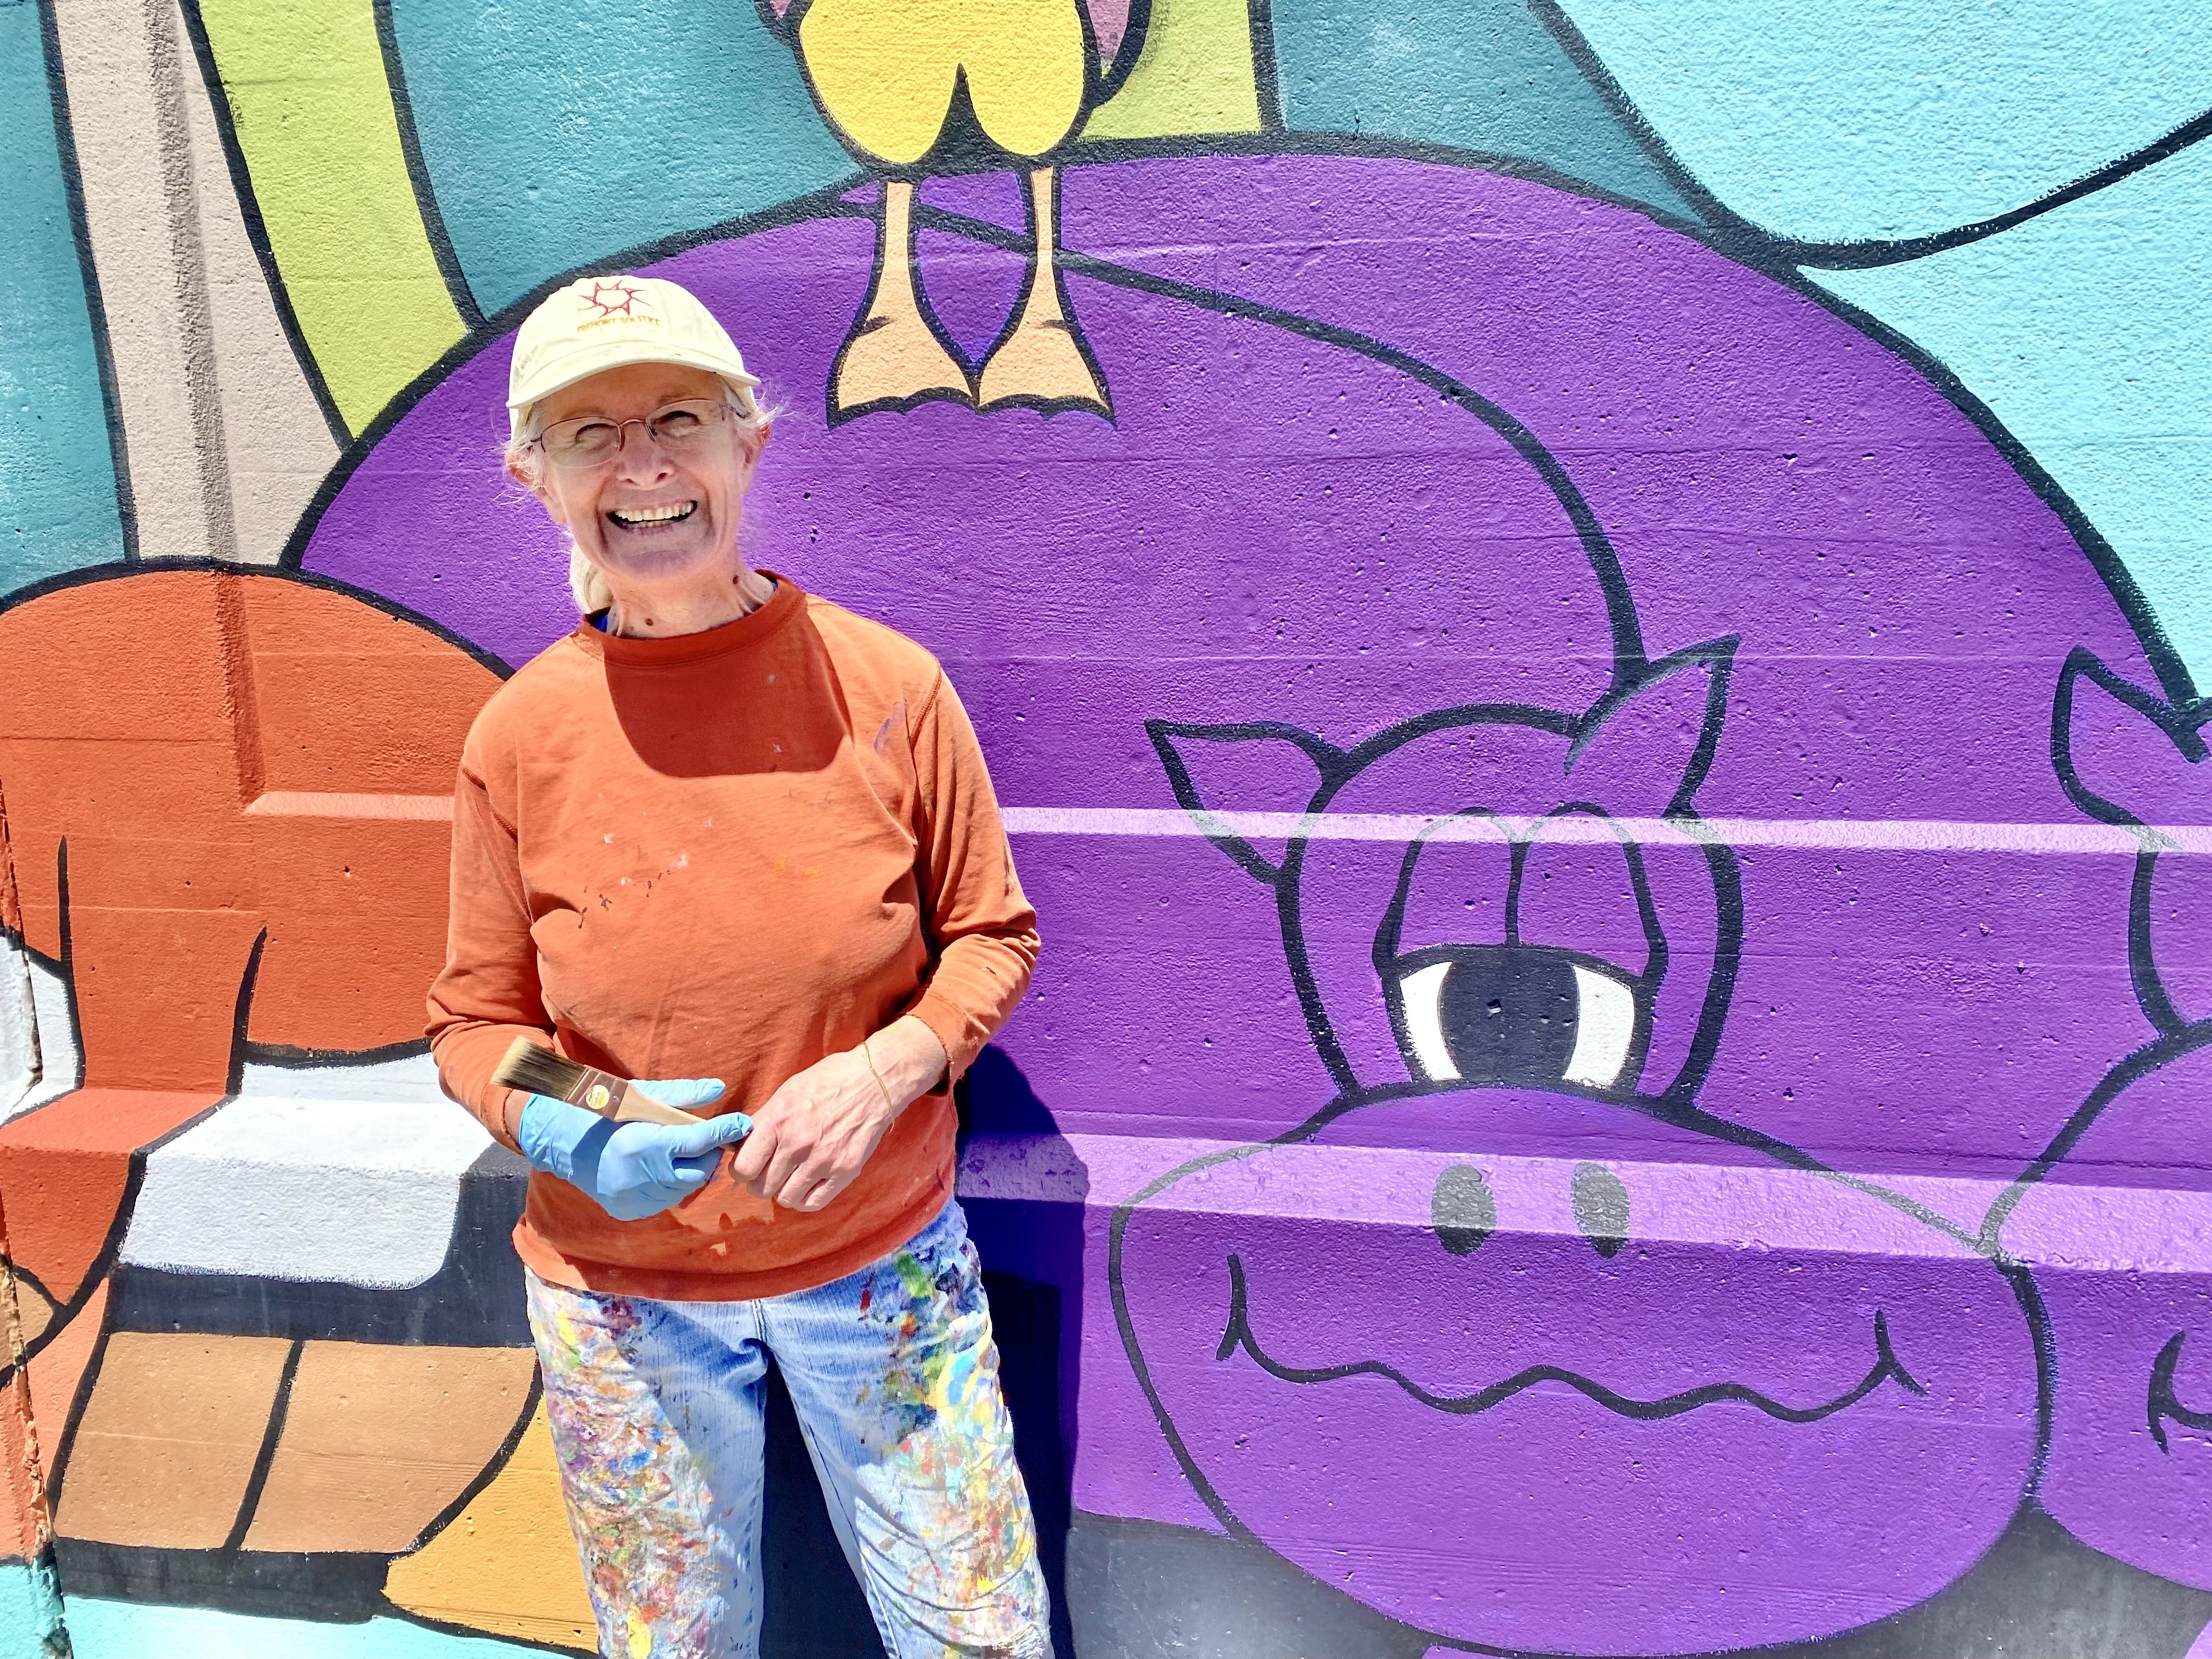 A woman in an orange-red shirt and paint stained pants stands next to two purple hippos in a mural.